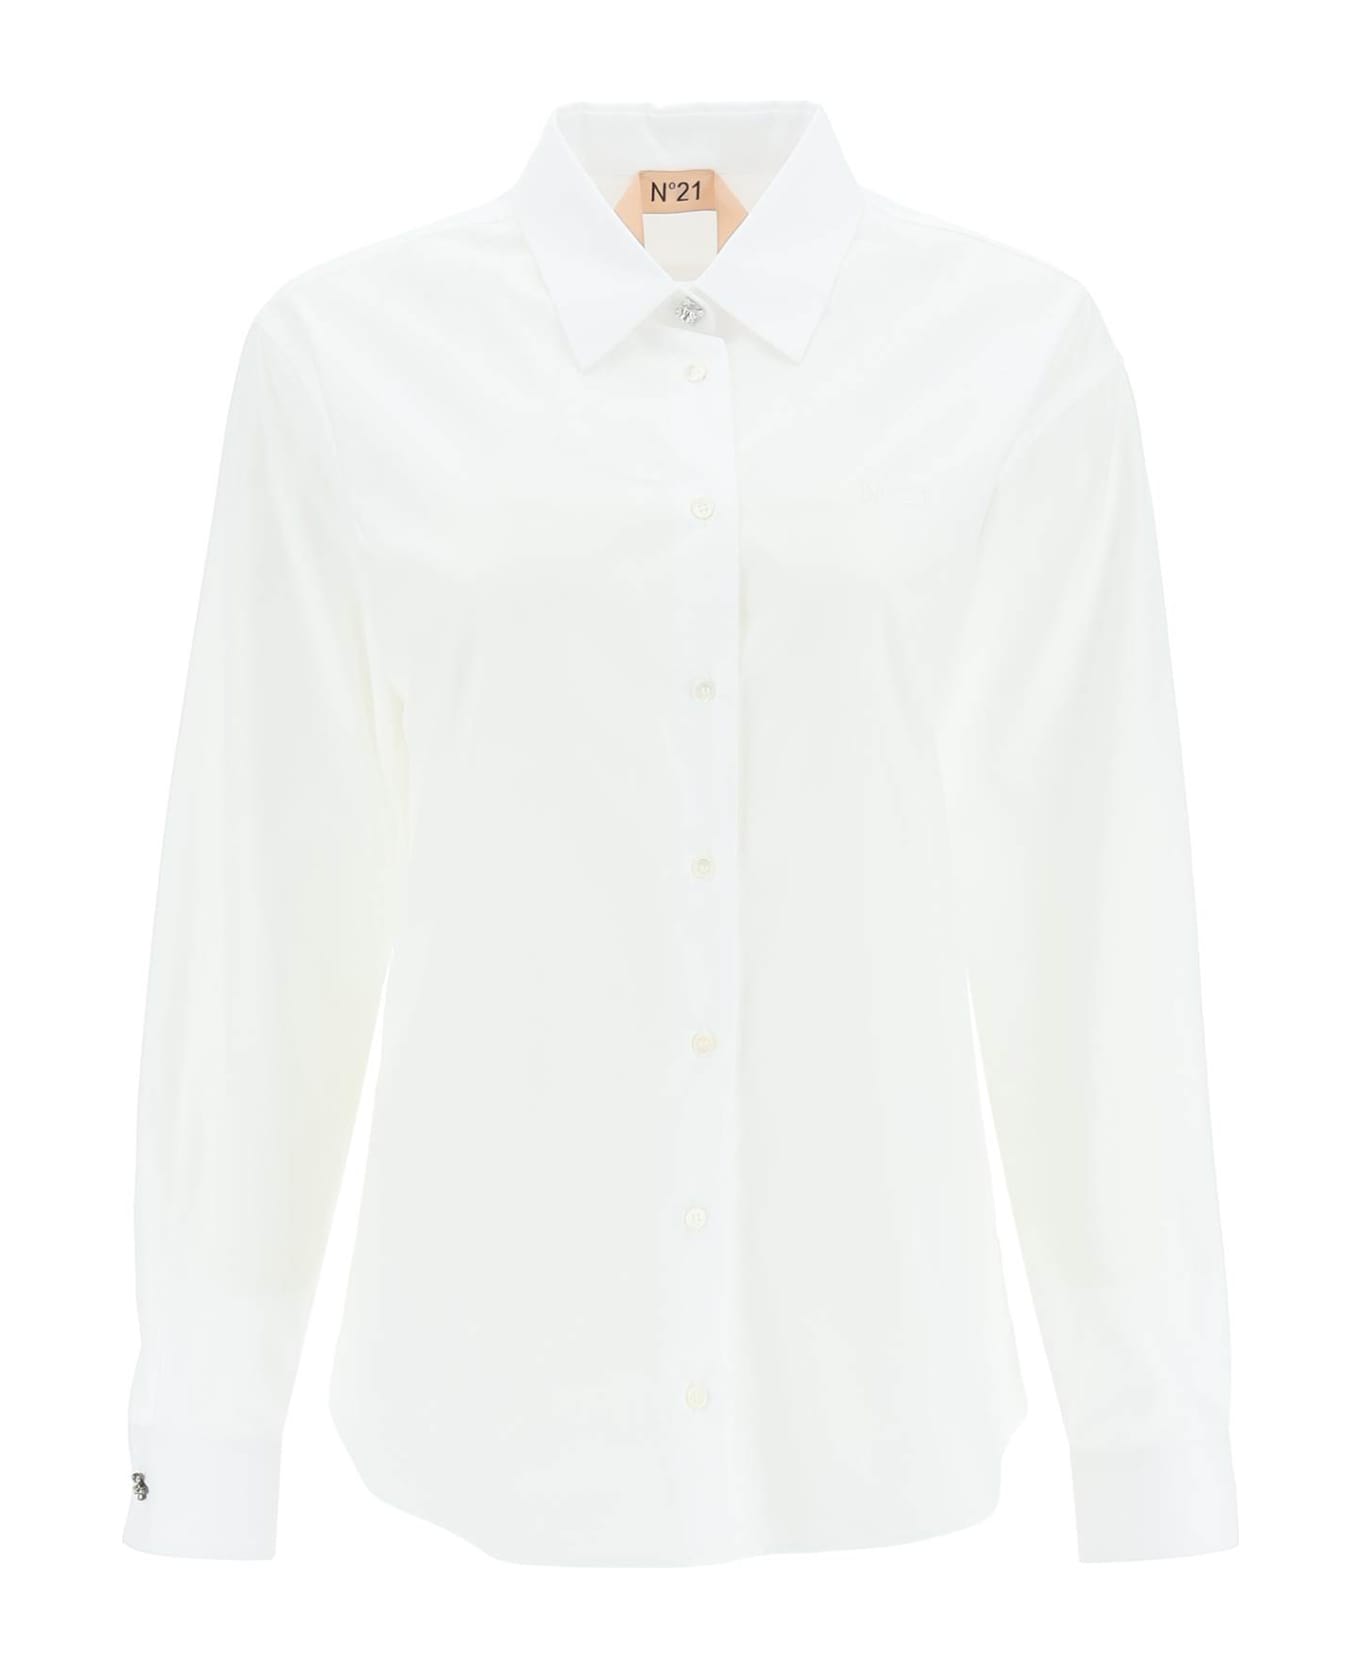 N.21 Shirt With Jewel Buttons - BIANCO OTTICO (White) シャツ